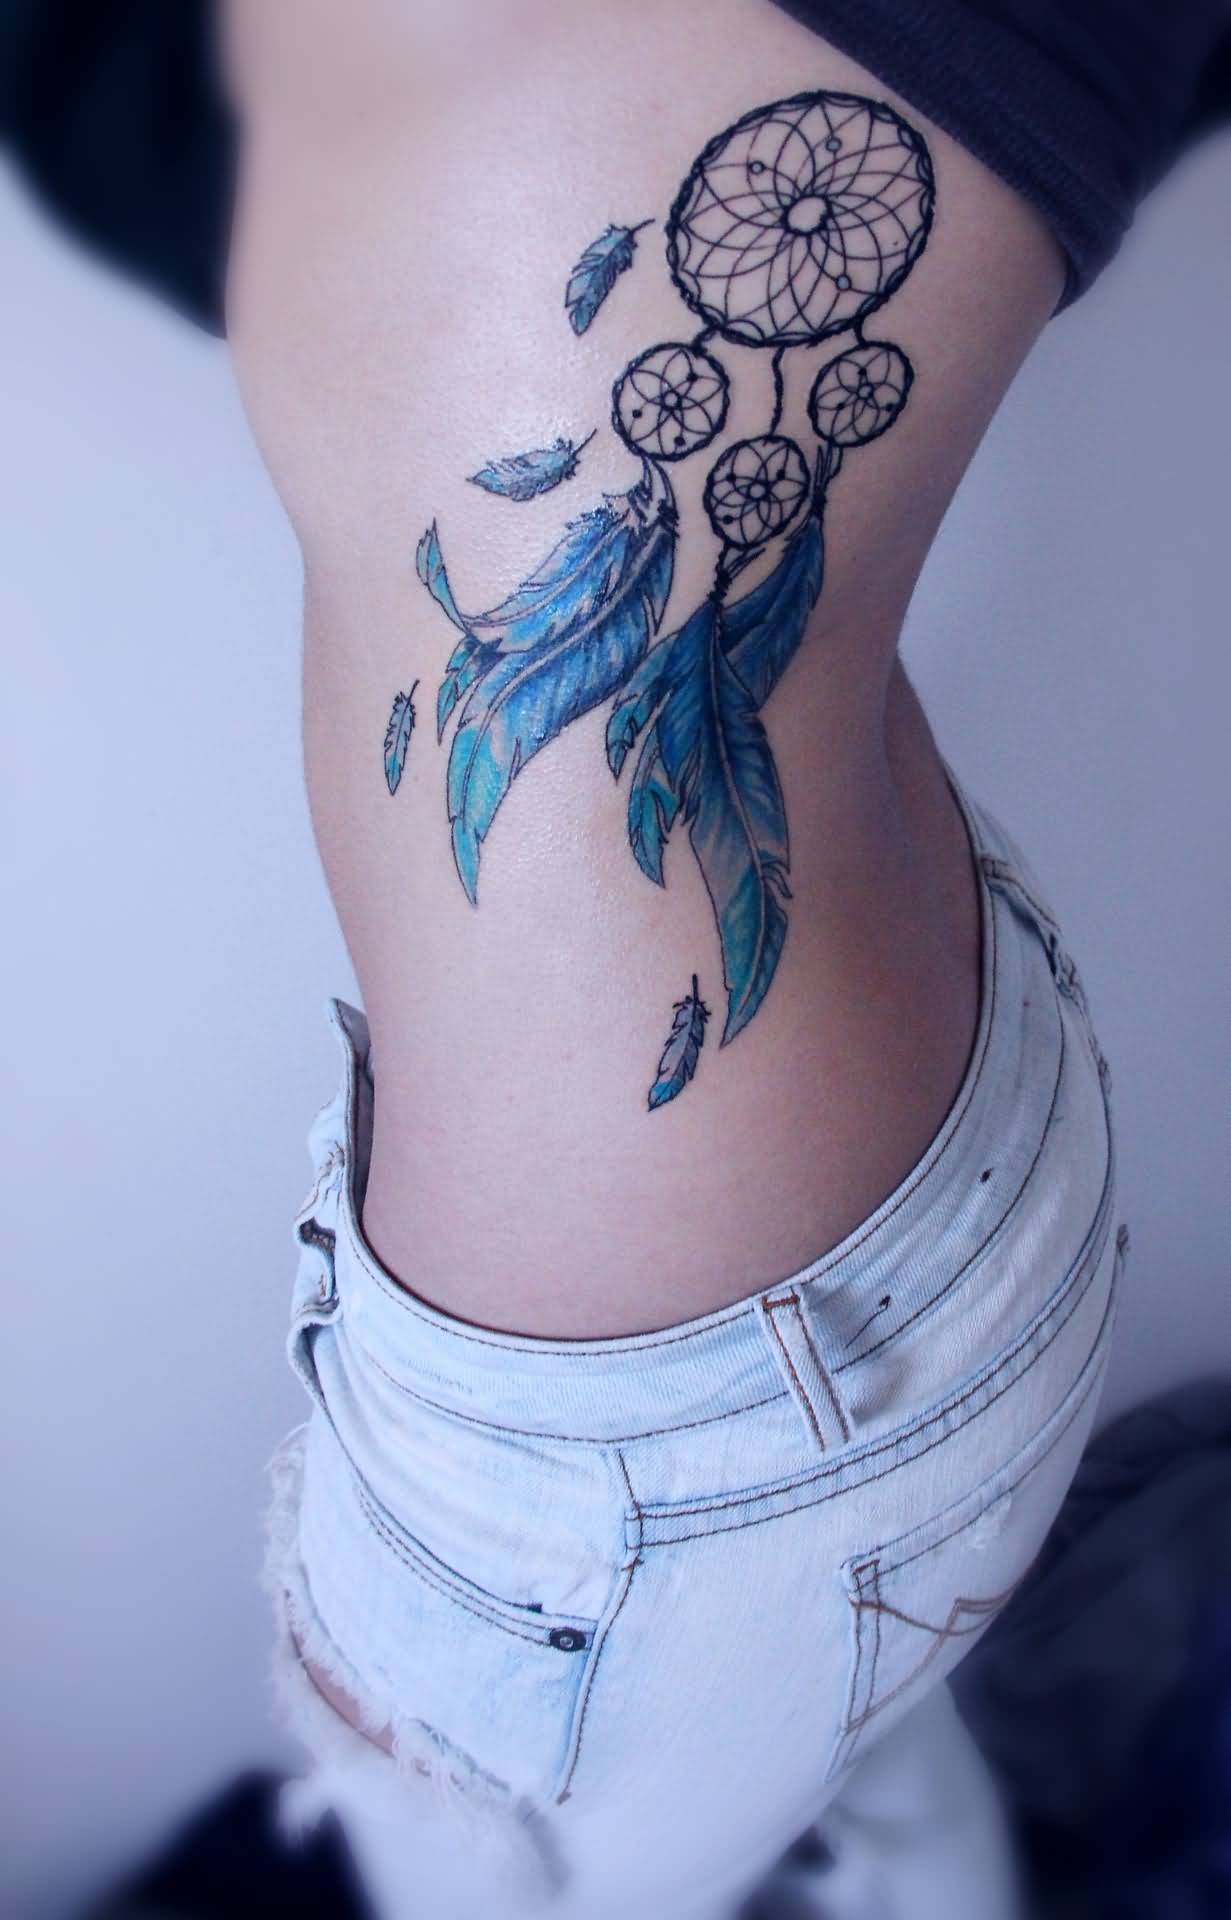 Awesome Dreamcatcher Rib Cage Tattoo